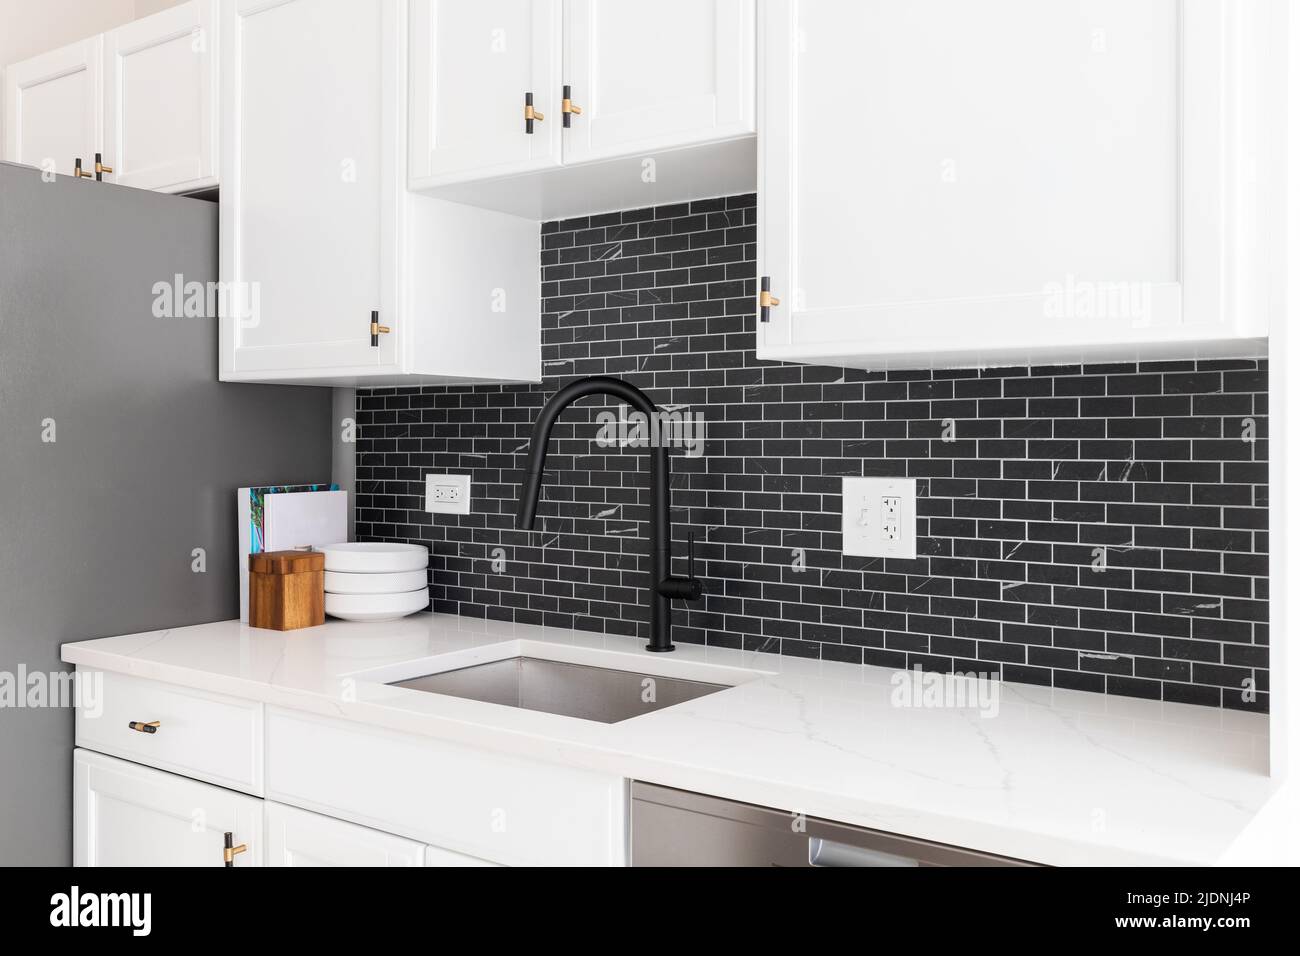 Kitchen sink detail shot with white cabinets, small black marble subway tile backsplash, and a black faucet. Stock Photo